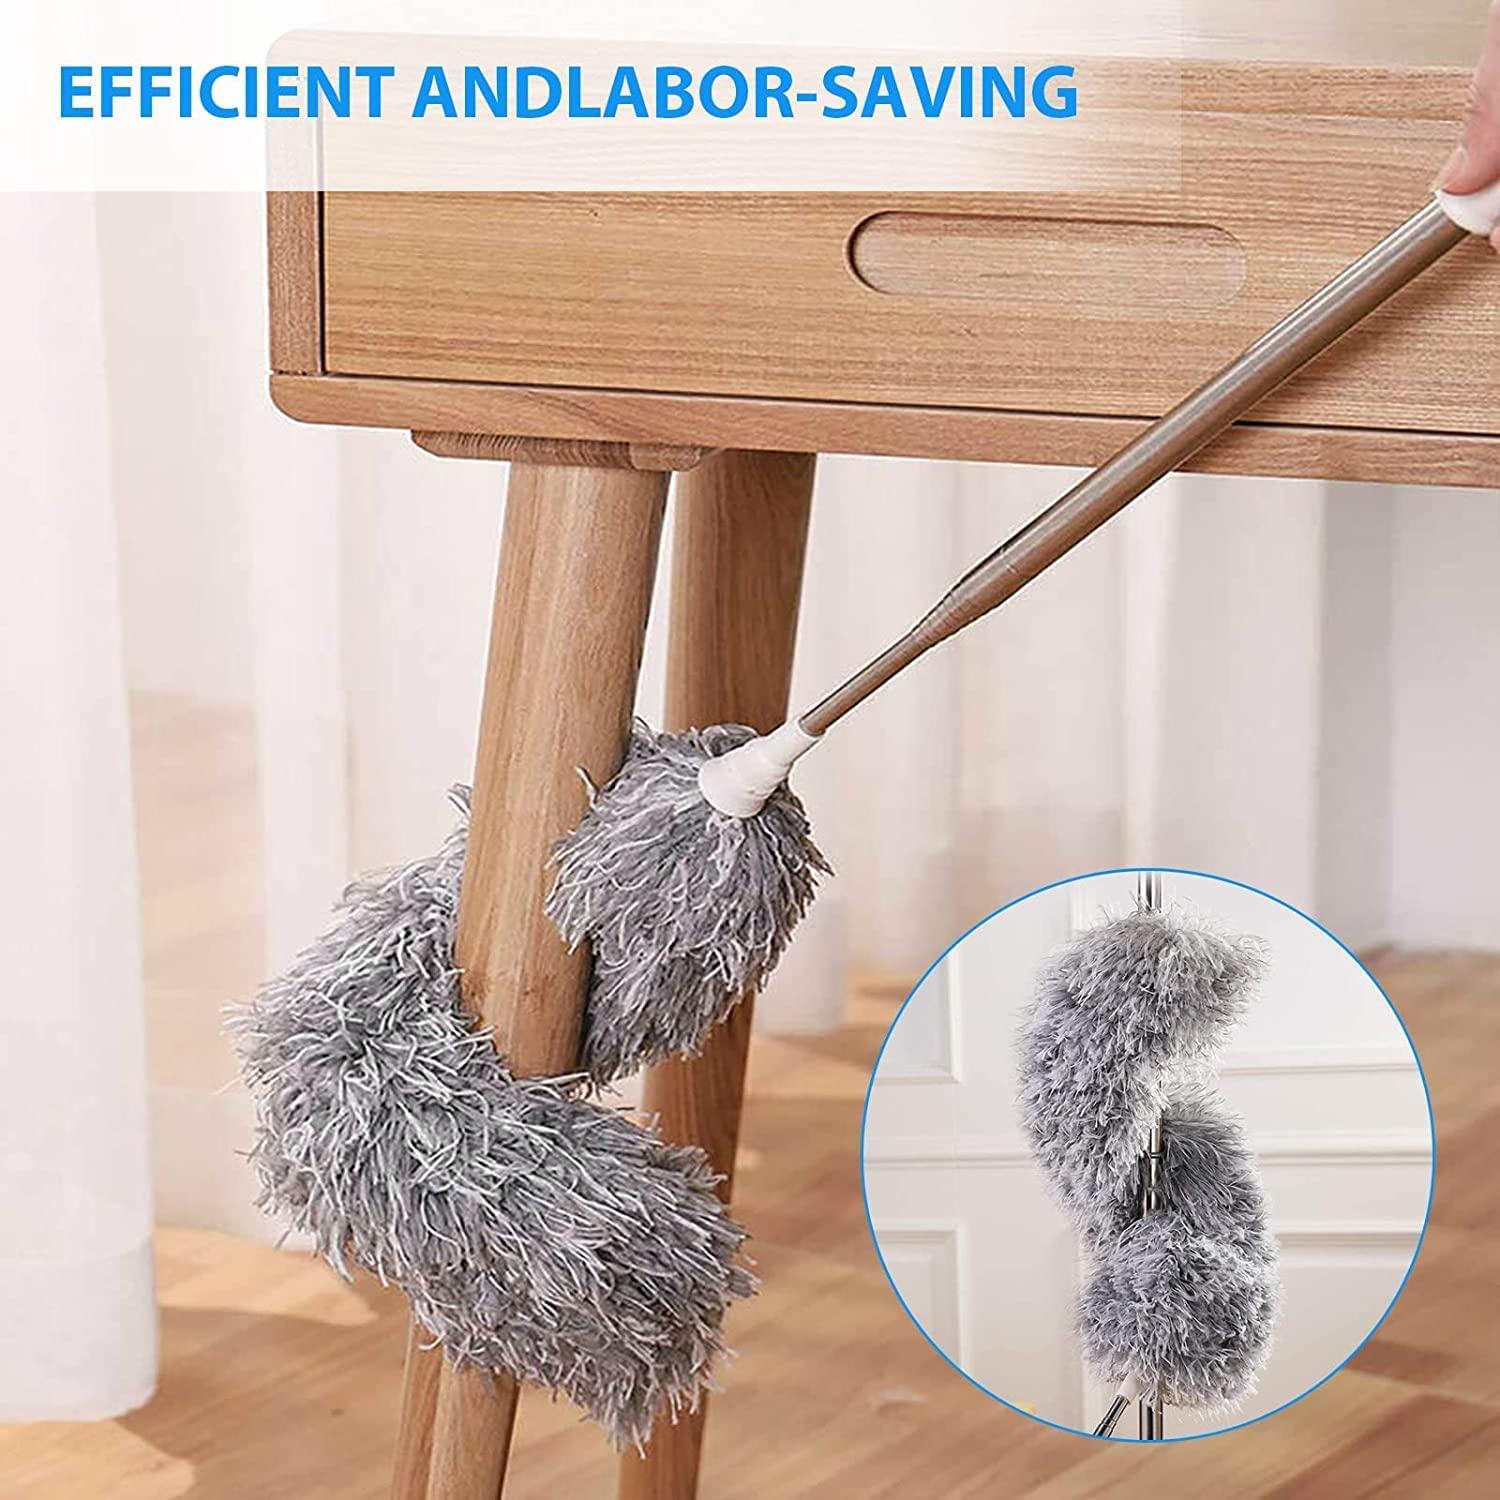 Retractable Gap Dust Cleaner, Microfiber Duster with Extension Pole,  Extendable Duster for Cleaning Long Handle Dust Brush Under Refrigerator  Sofa